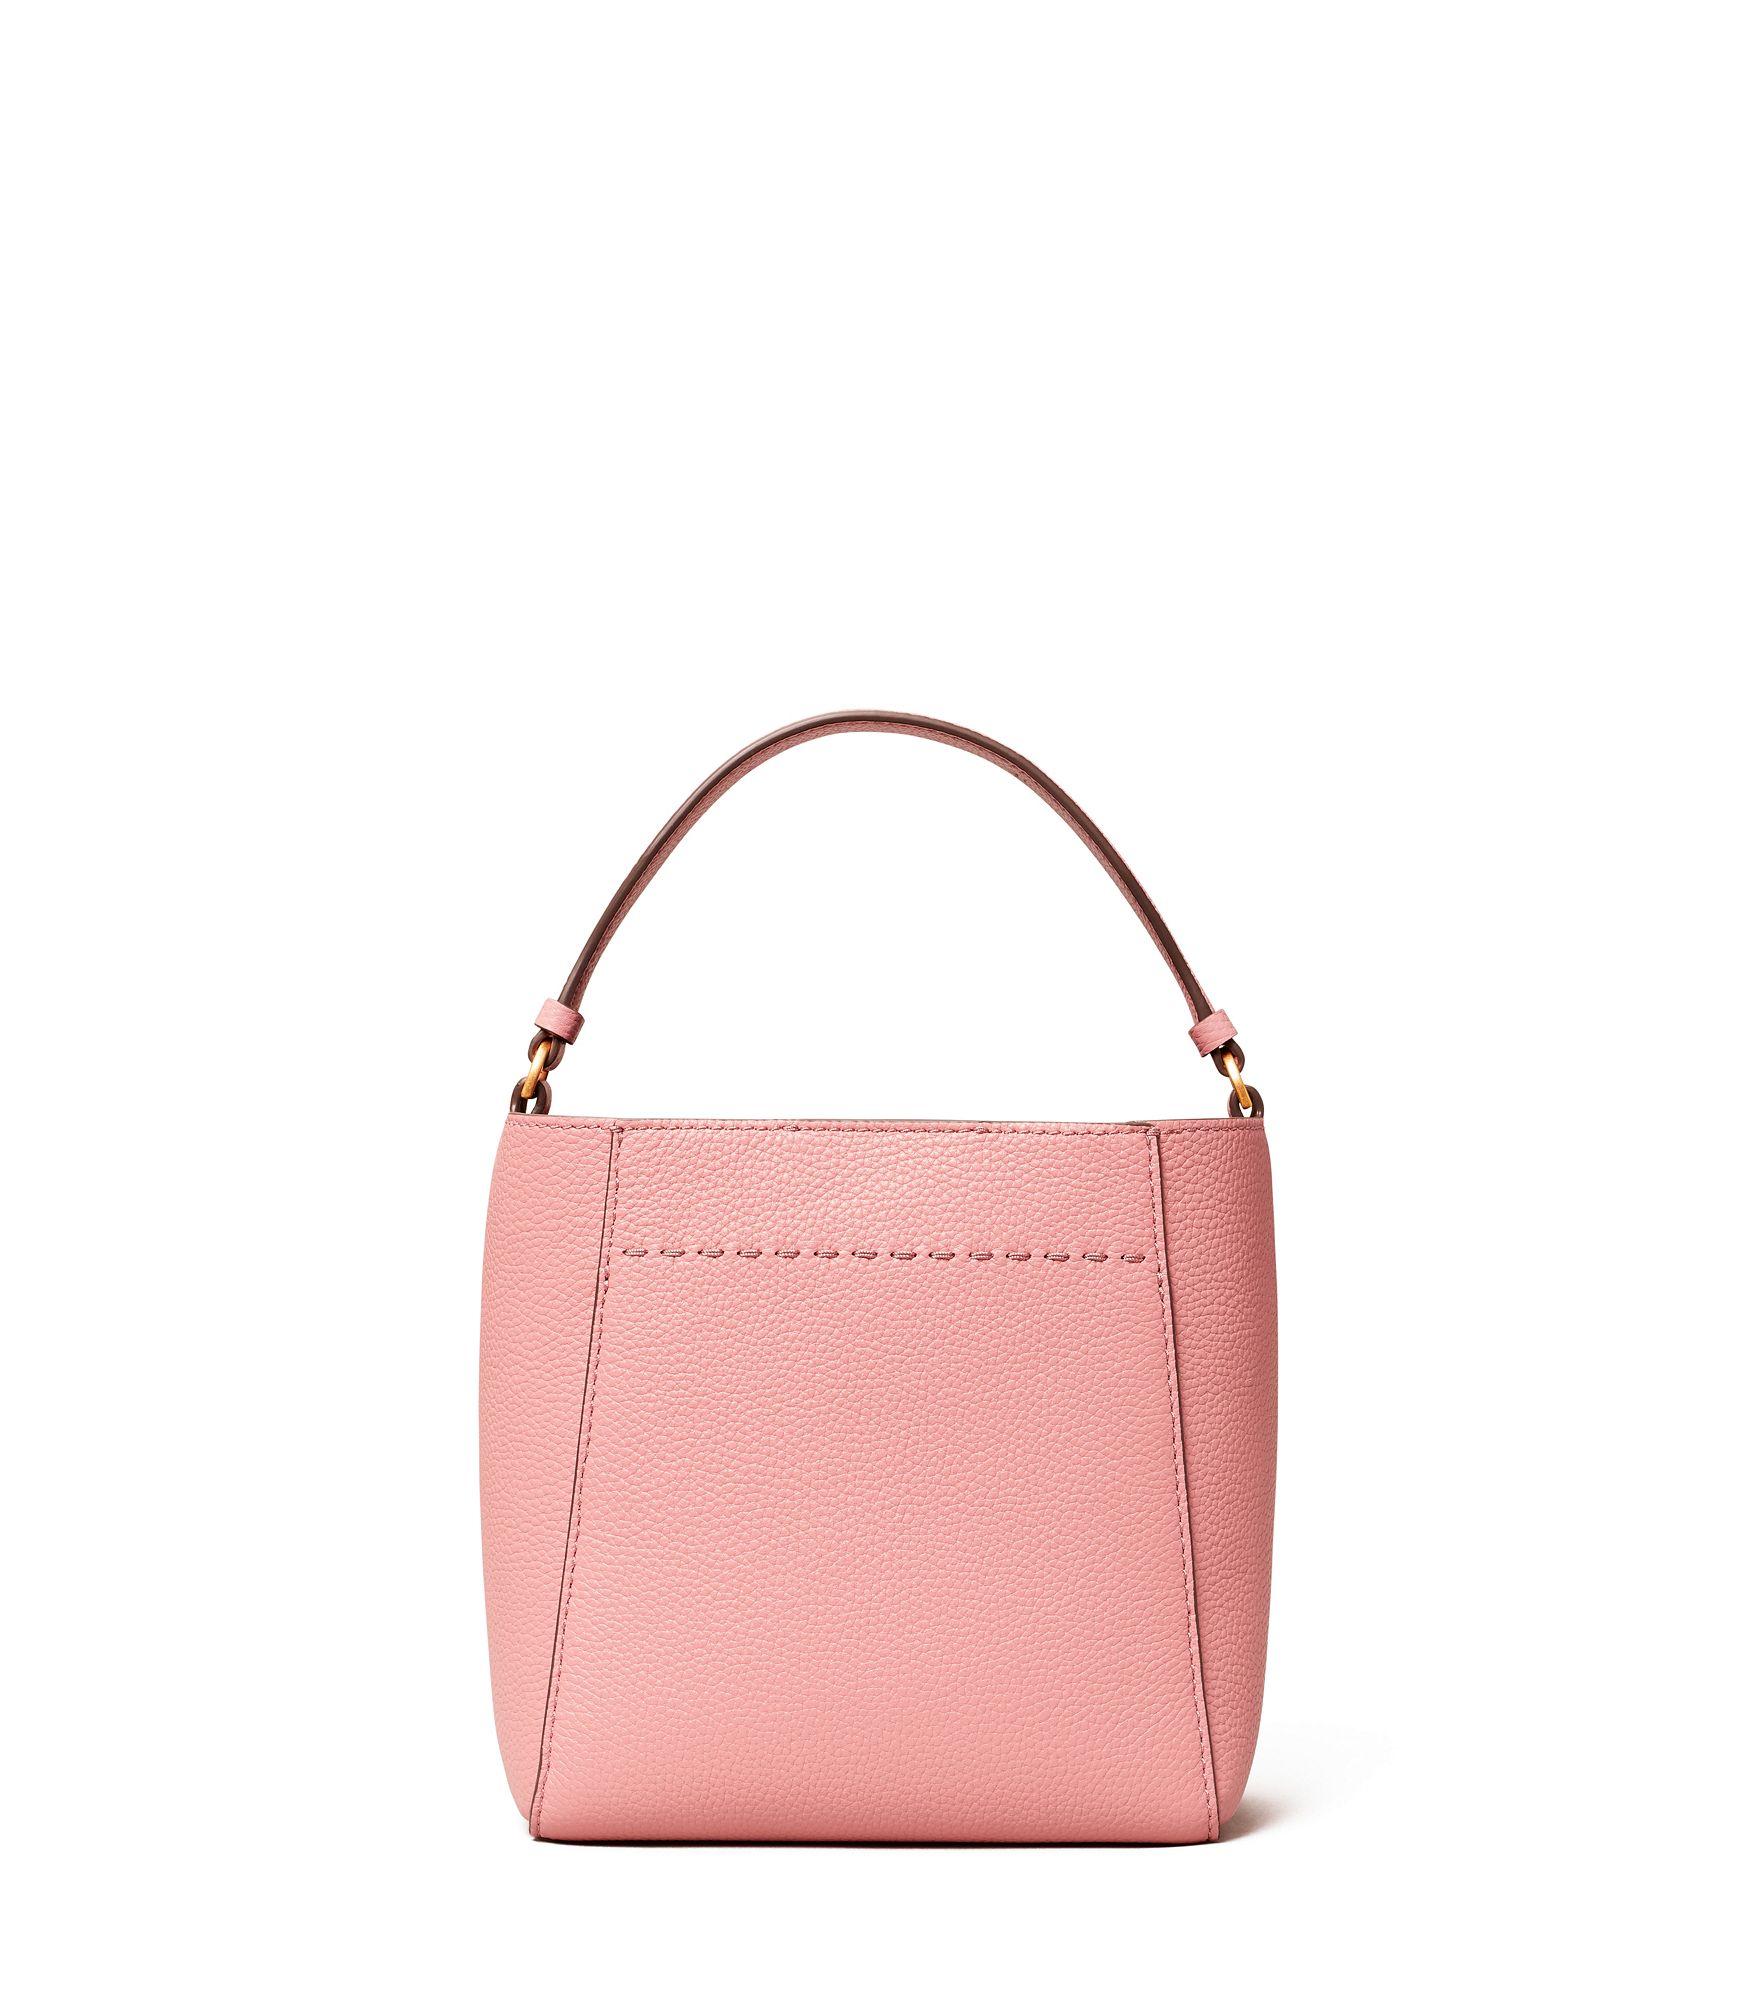 Tory Burch Mcgraw Small Bucket Bag in Pink